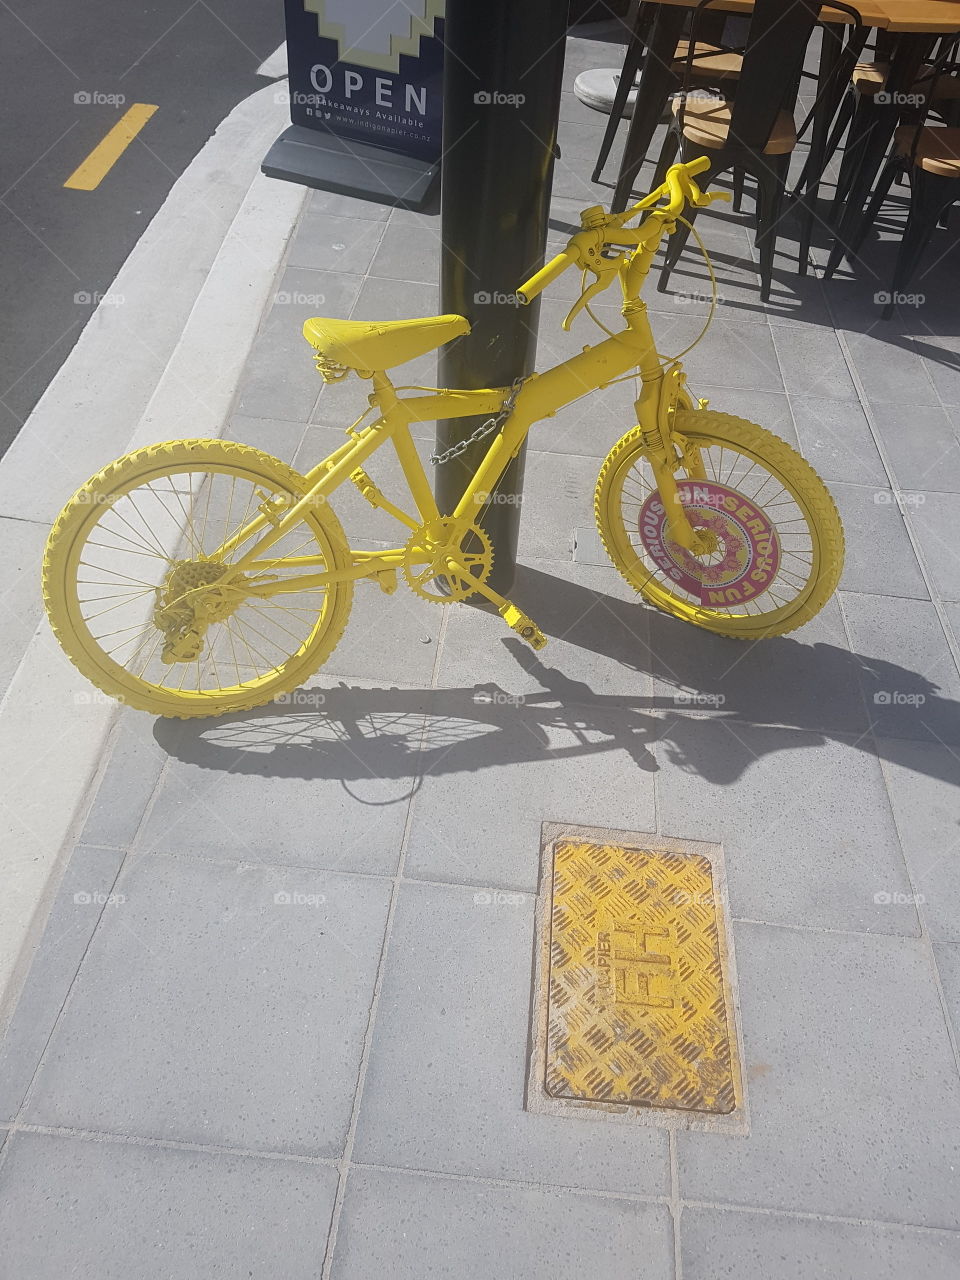 The yellow bike. A sight to see in Napier are the bikes around the city. All of them a different color and idea given to the council by my own son.